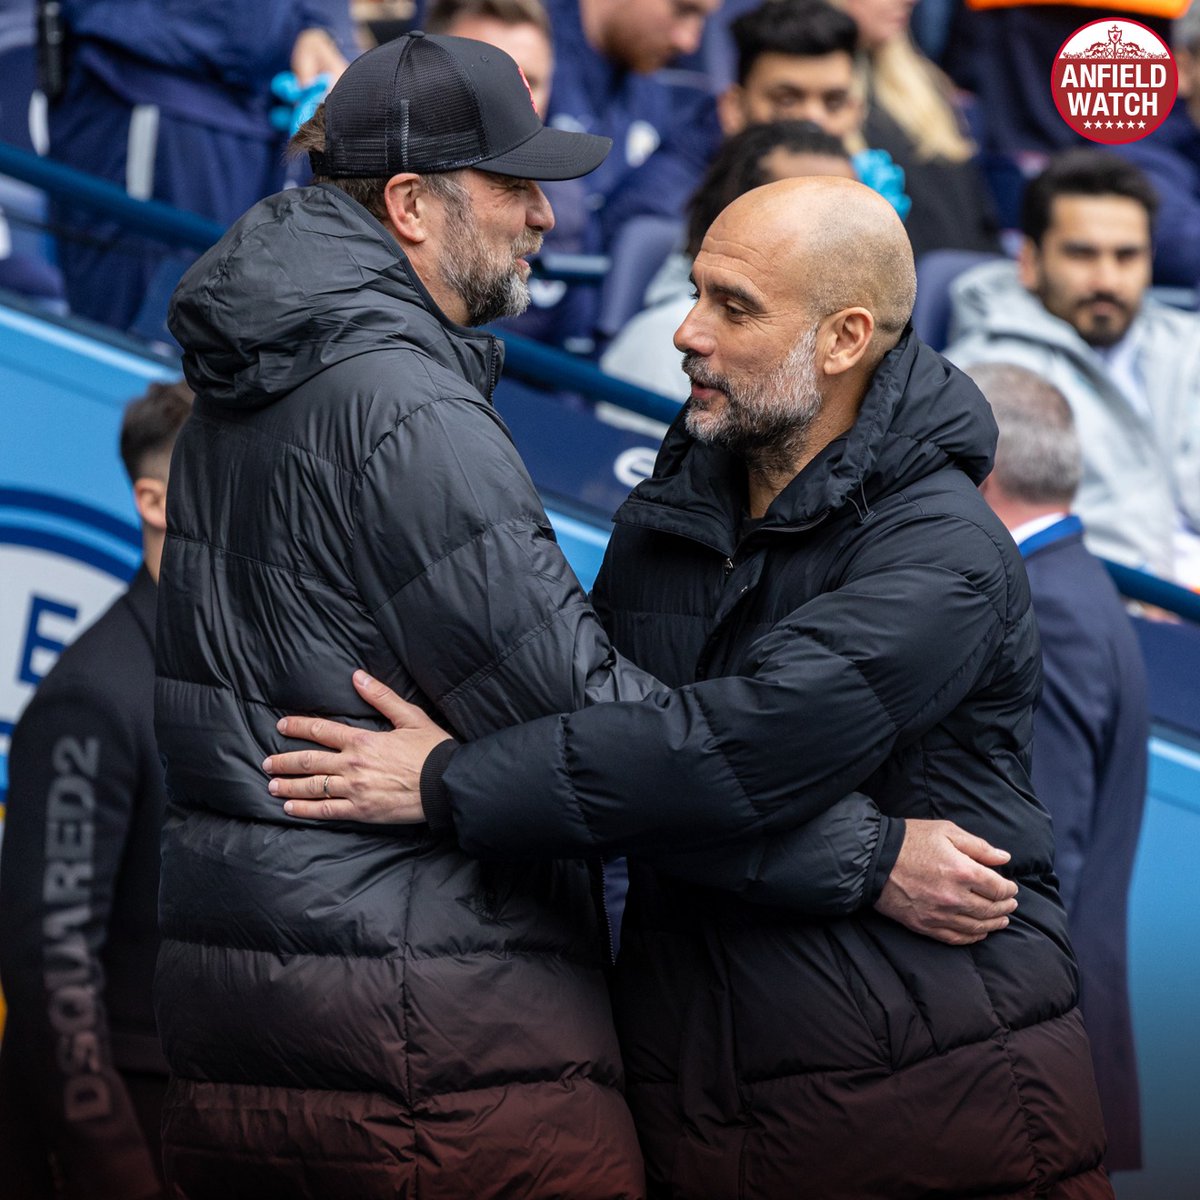 Jurgen Klopp on Man City:"I think I’ve said it before, if City had not been there we probably would have won one more at least, that’s how it is. If Pep would not be the manager he is, I would’ve probably won one or two more with Dortmund in the cup final maybe." 